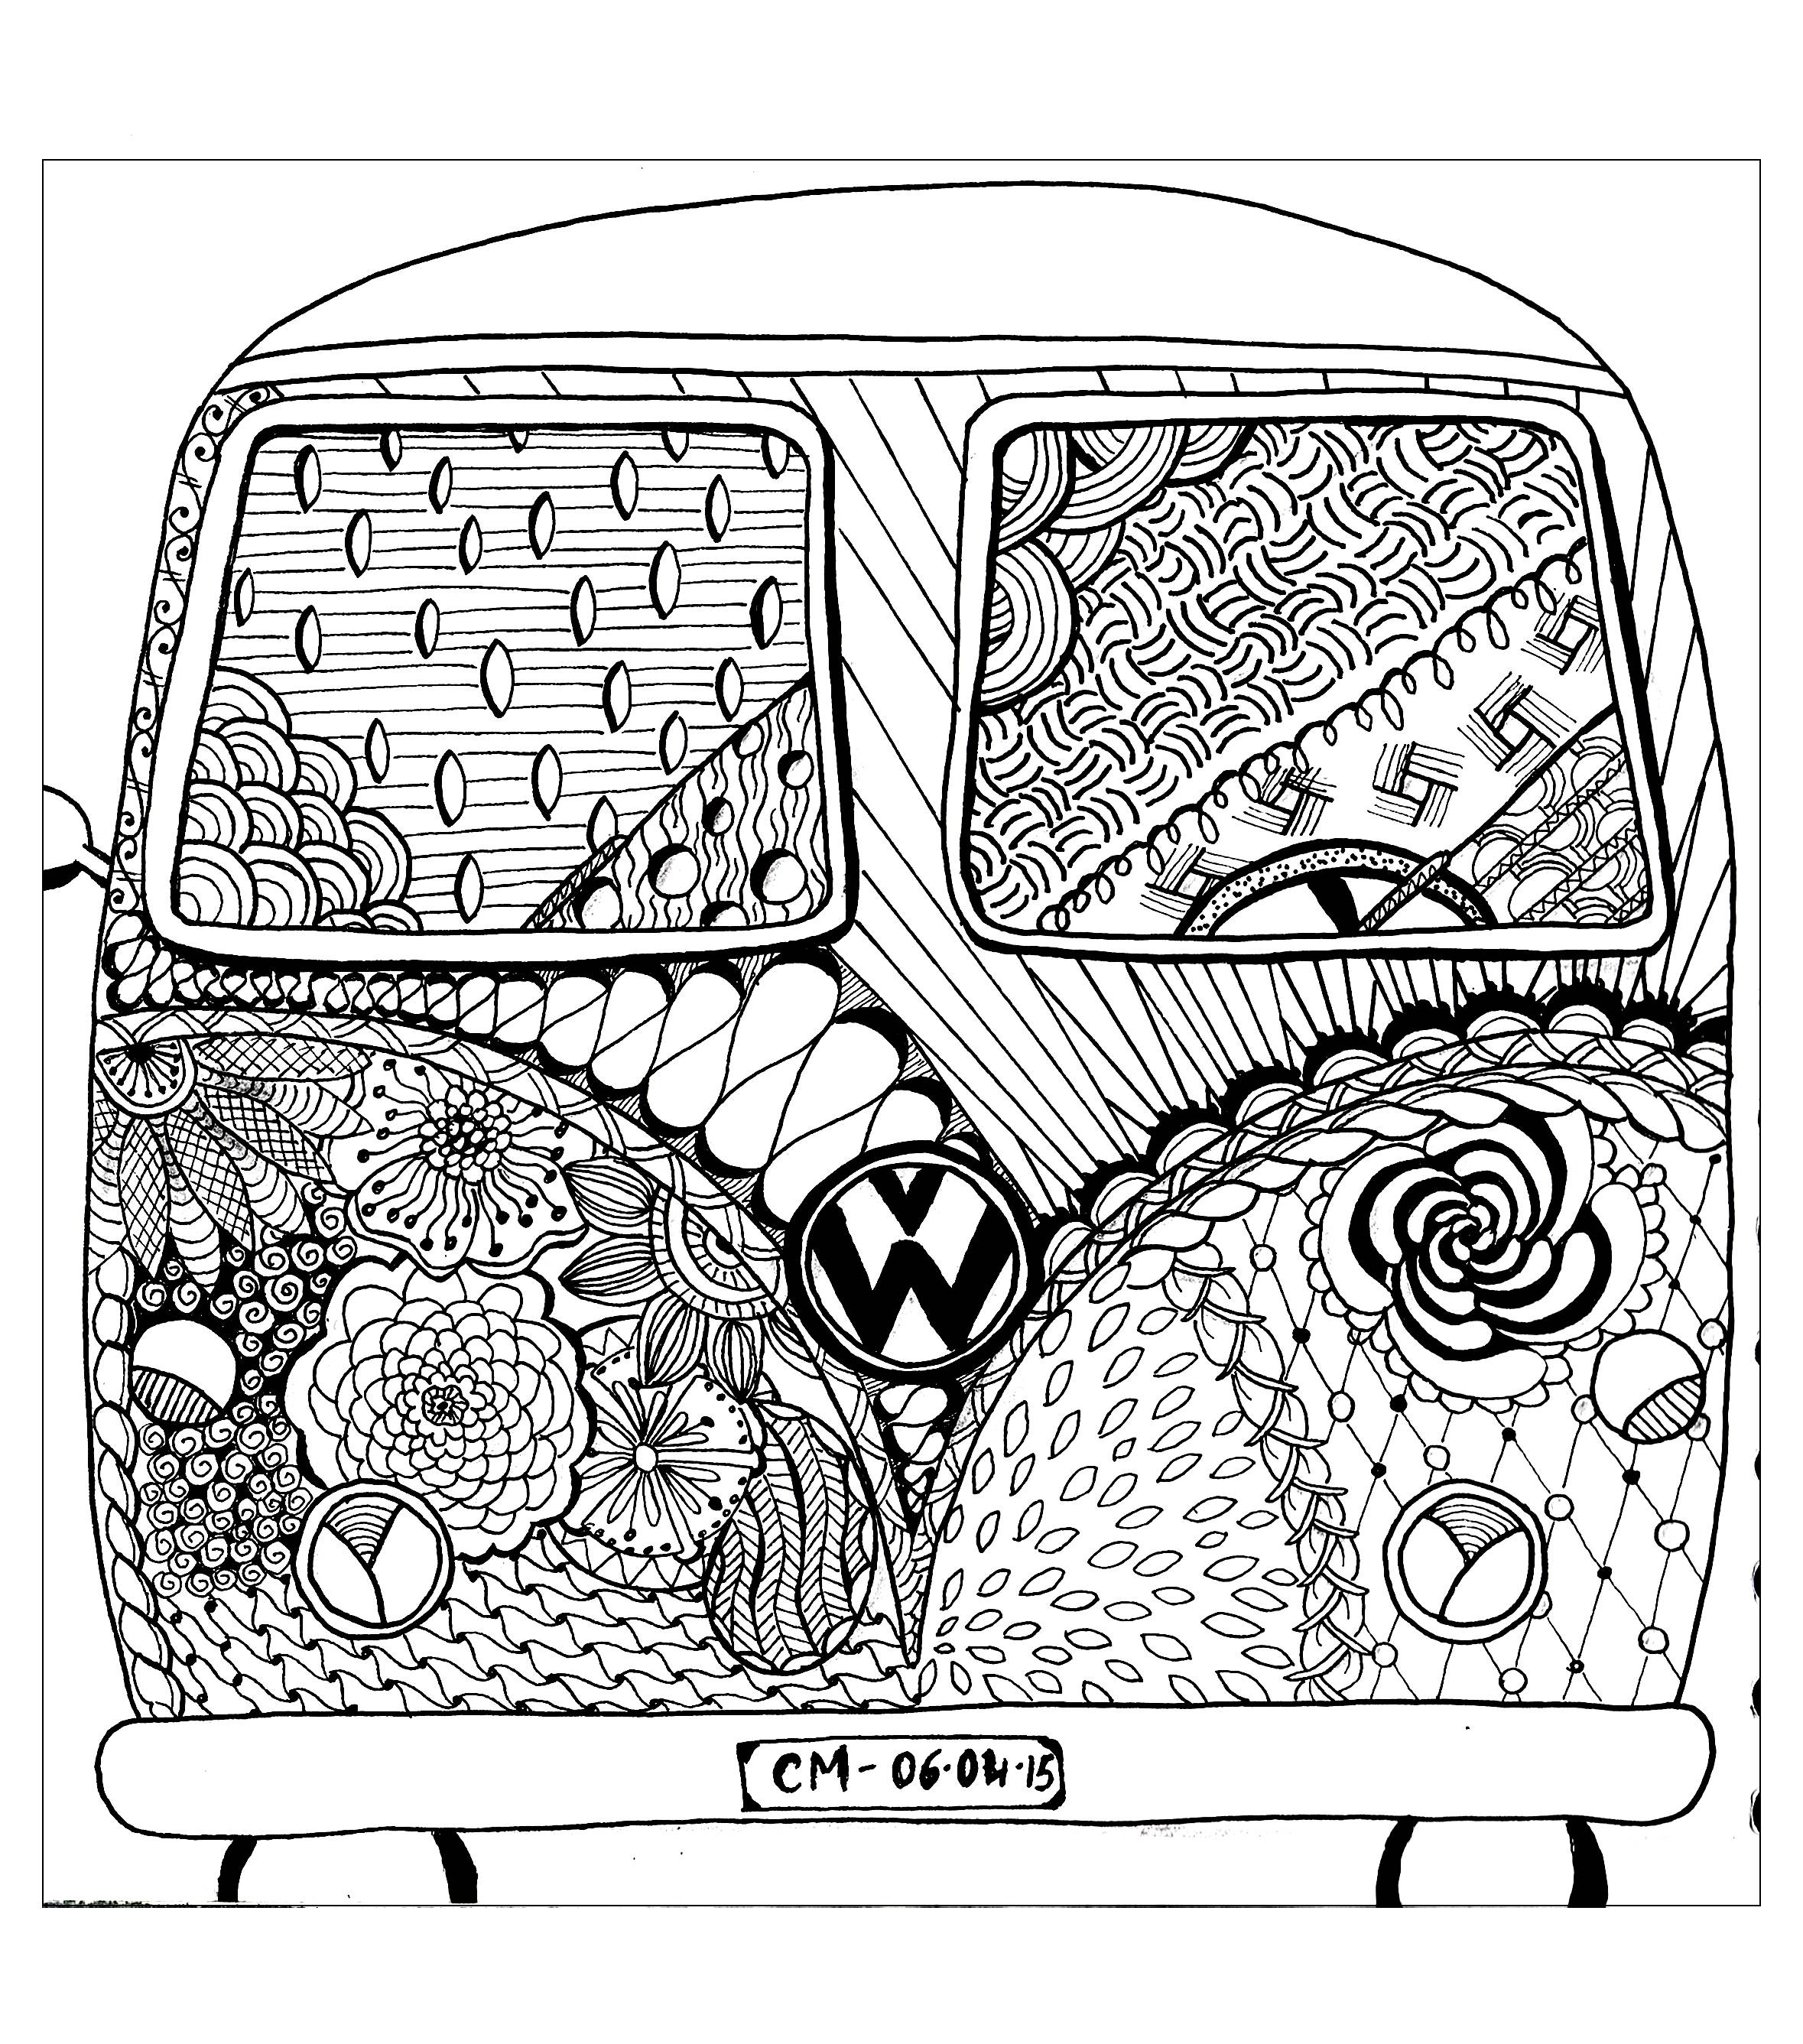 'Hippie camper', exclusive coloring page See the original work, Artist : Cathy M